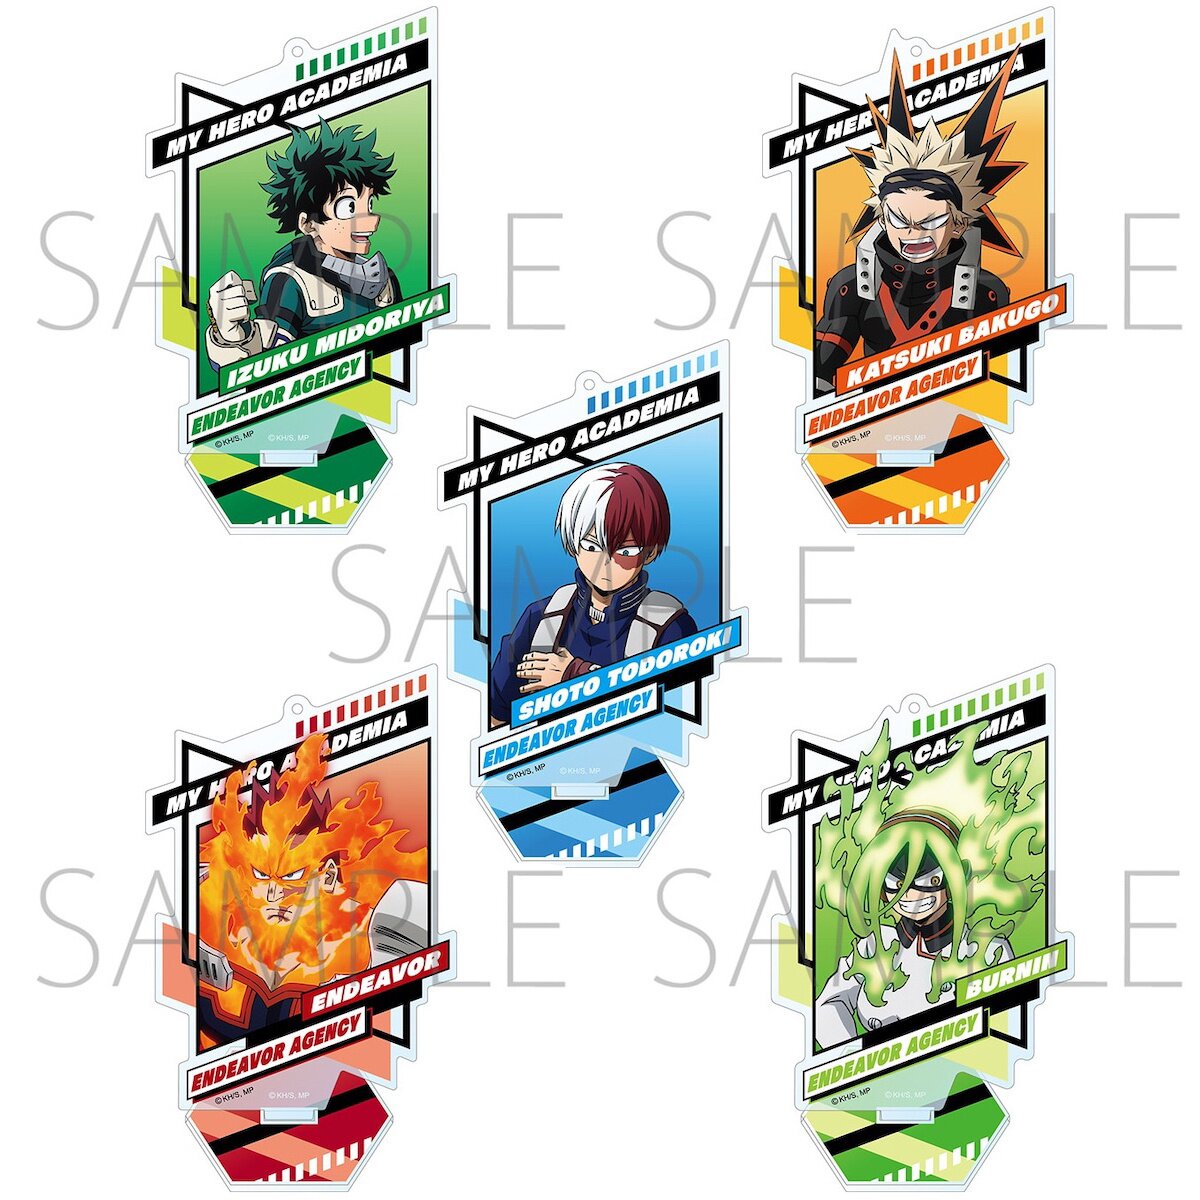 My Hero Academia THE MOVIE World Heroes Mission Movie Acrylic Stand Endeavor